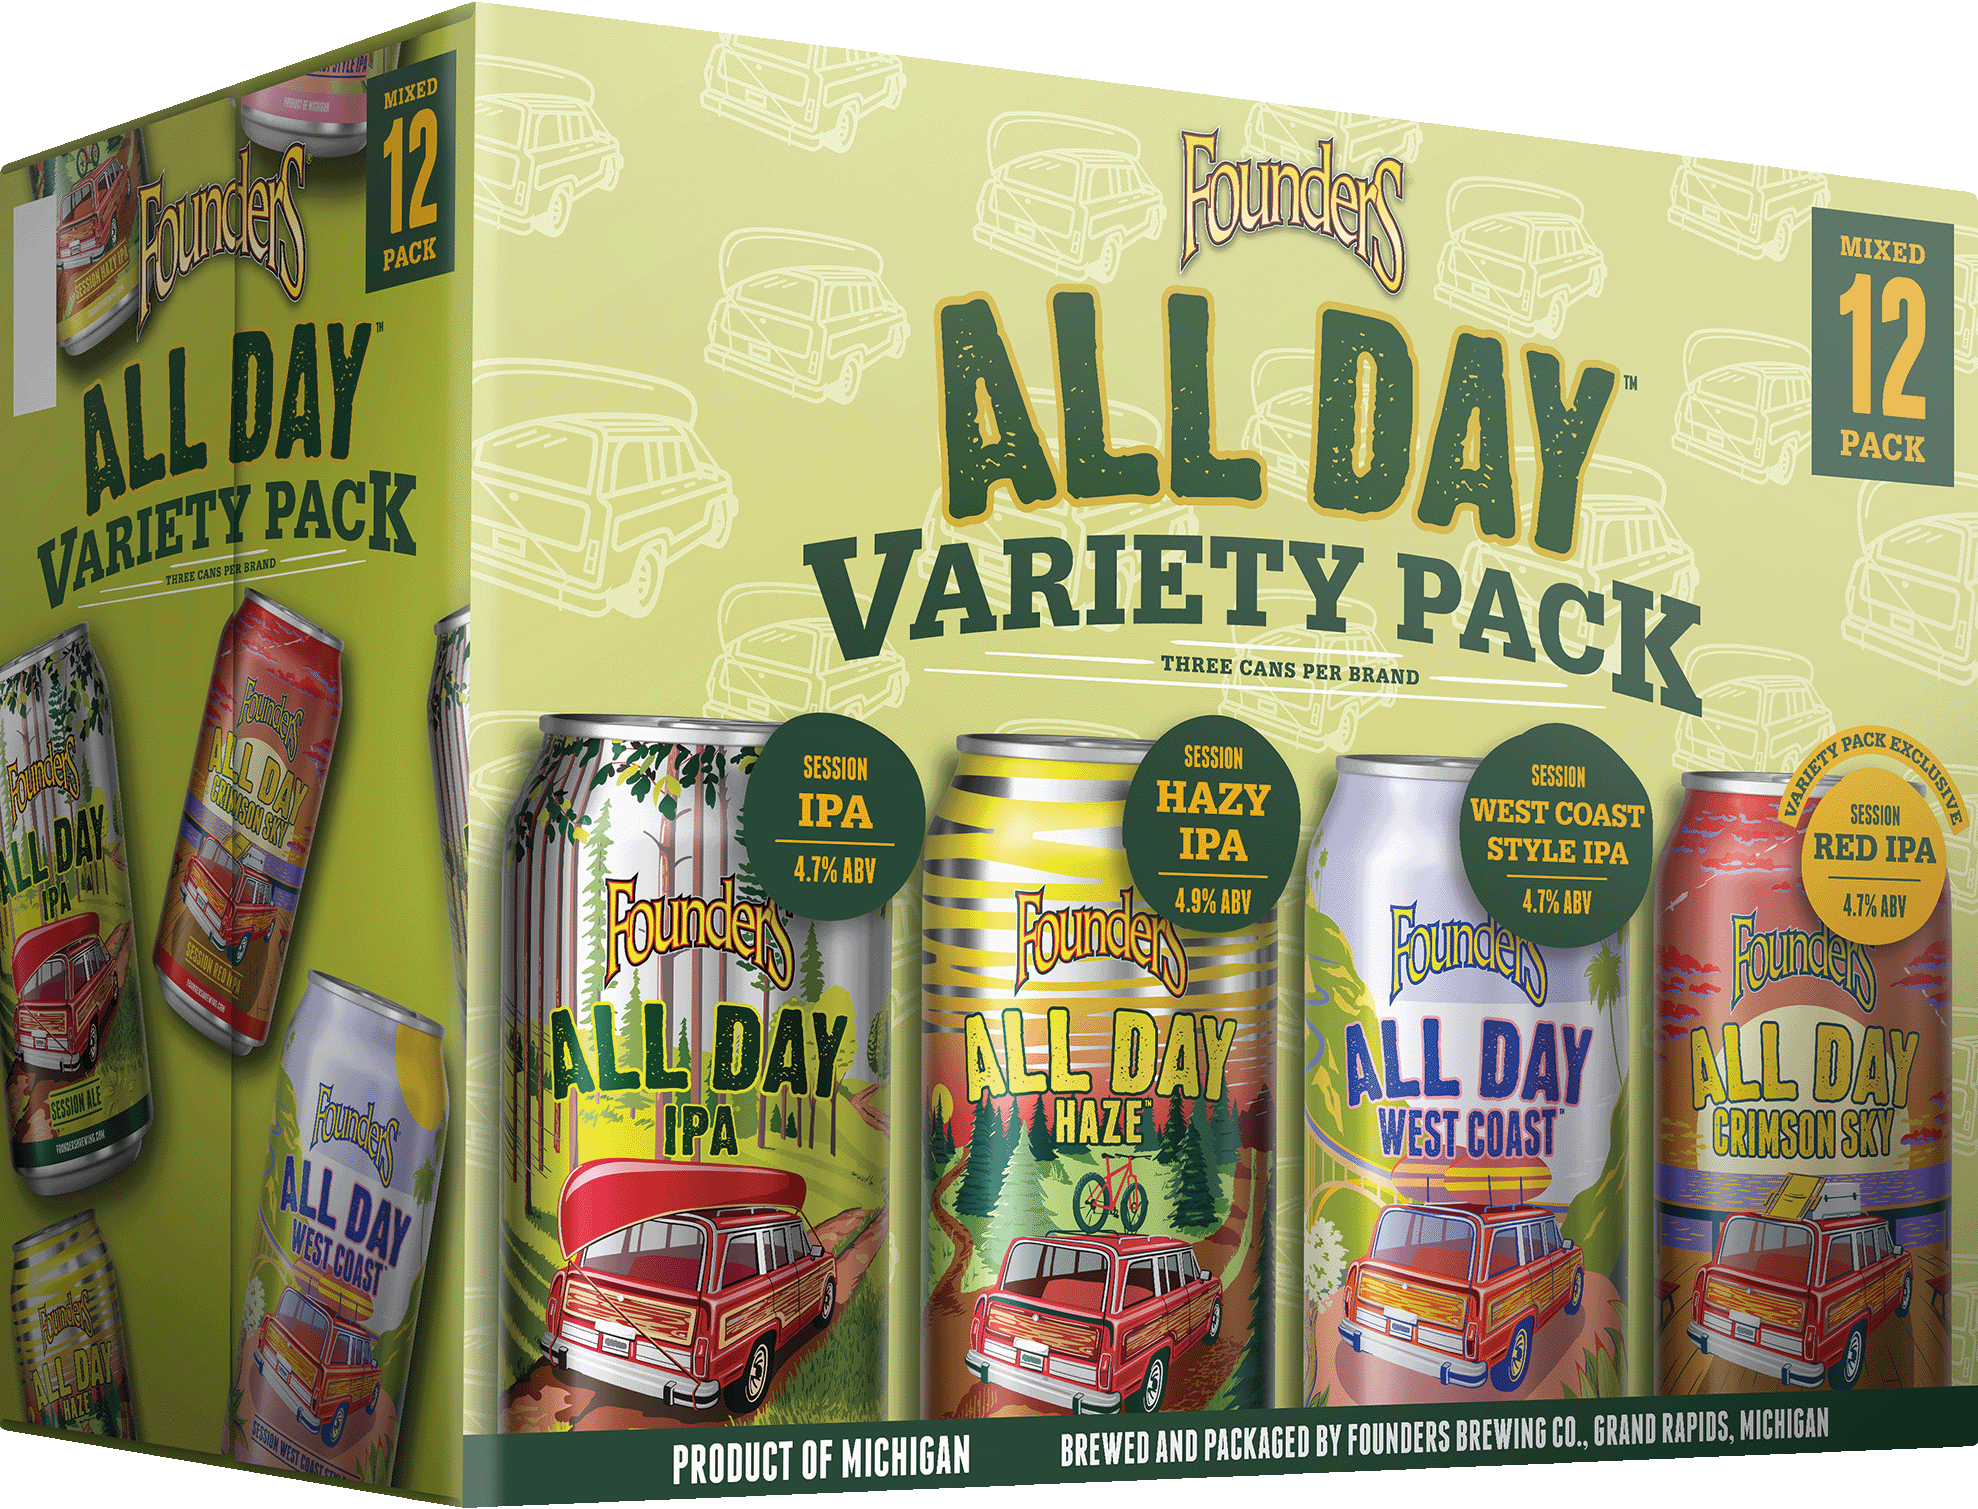 All Day Variety Pack packaging